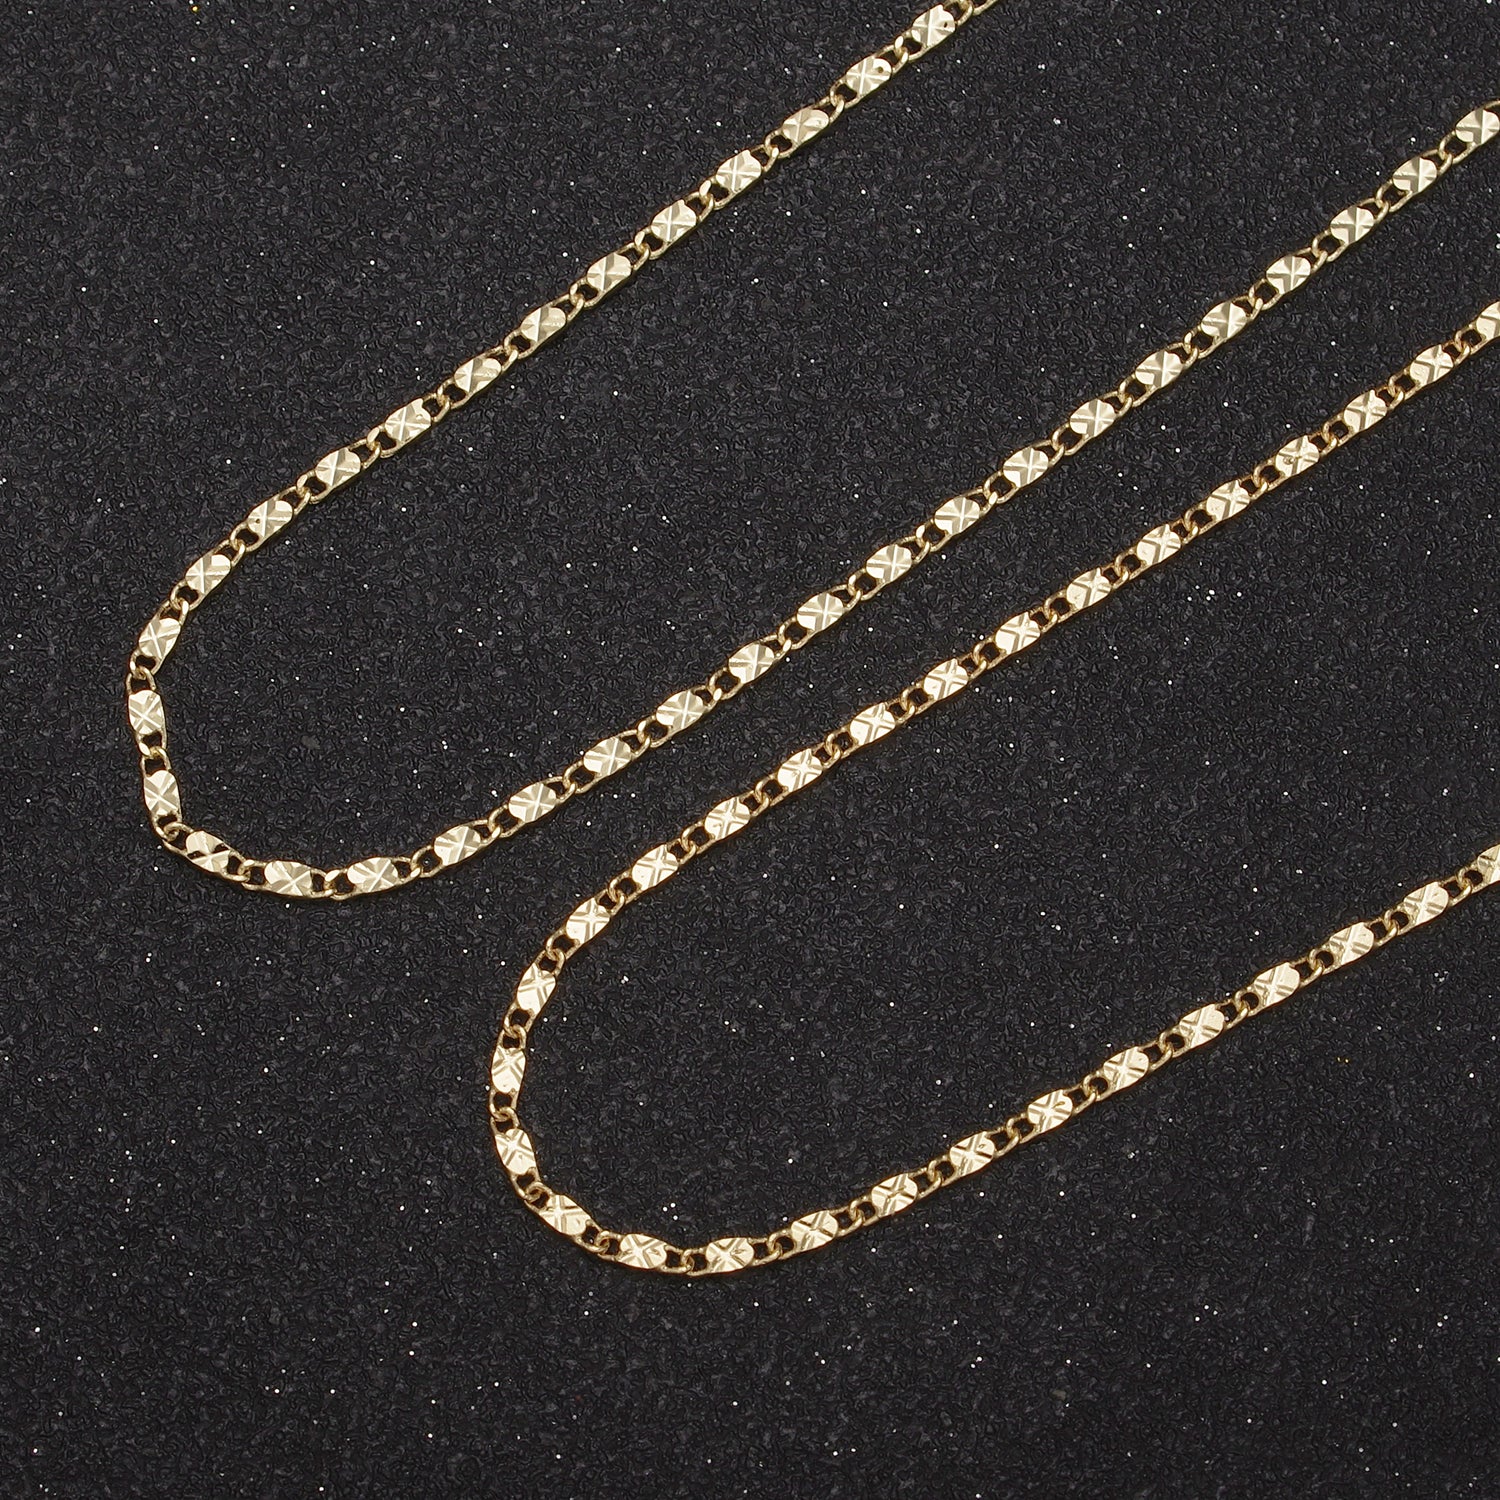 Wholesale Gold Chain Necklace, Fine Scroll Gold Chain, Simple Gold Necklace, Thin Plain Women's Necklace 18" 20" Women Chain - DLUXCA